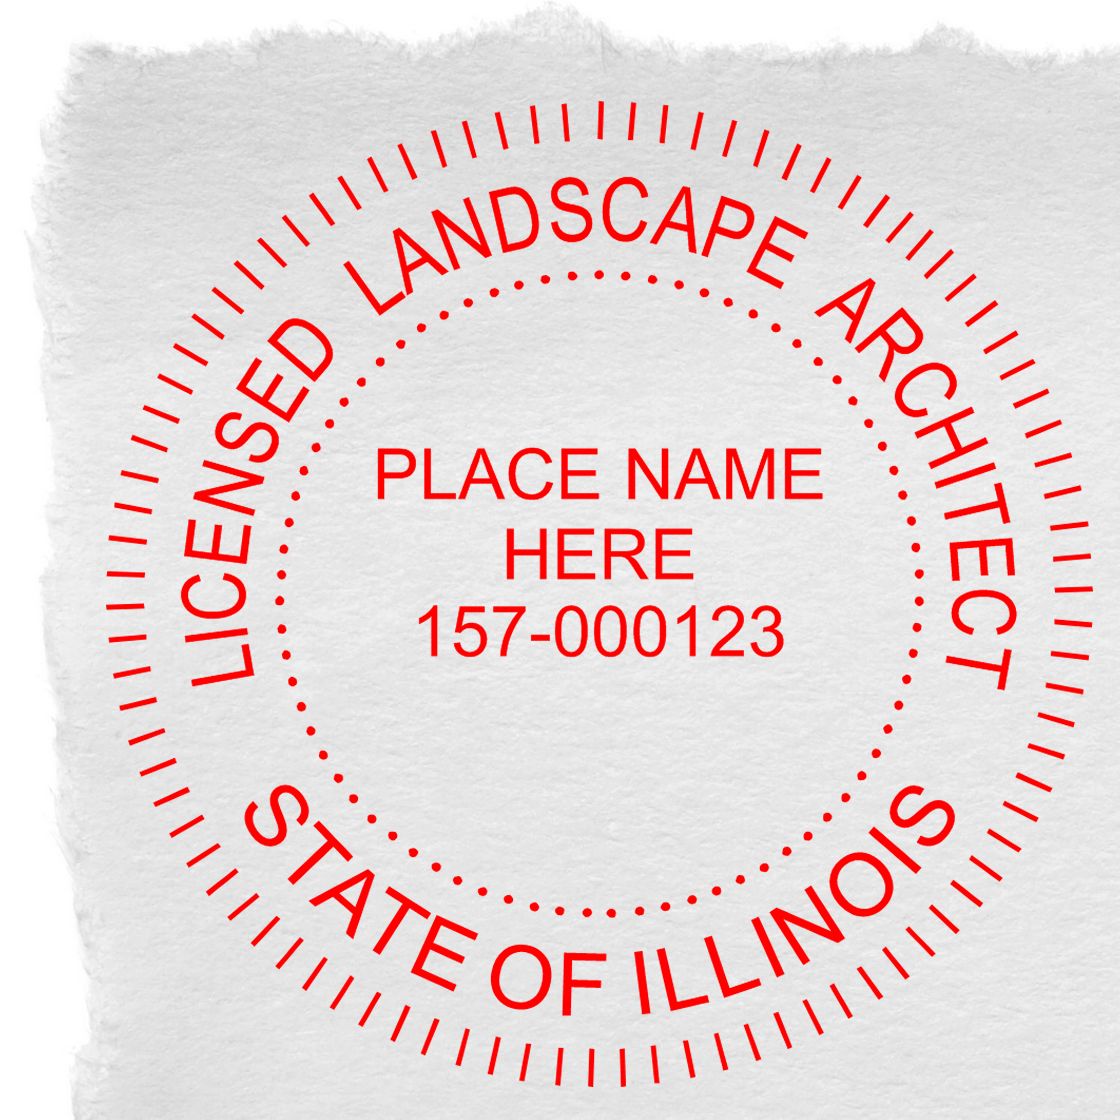 An alternative view of the Premium MaxLight Pre-Inked Illinois Landscape Architectural Stamp stamped on a sheet of paper showing the image in use